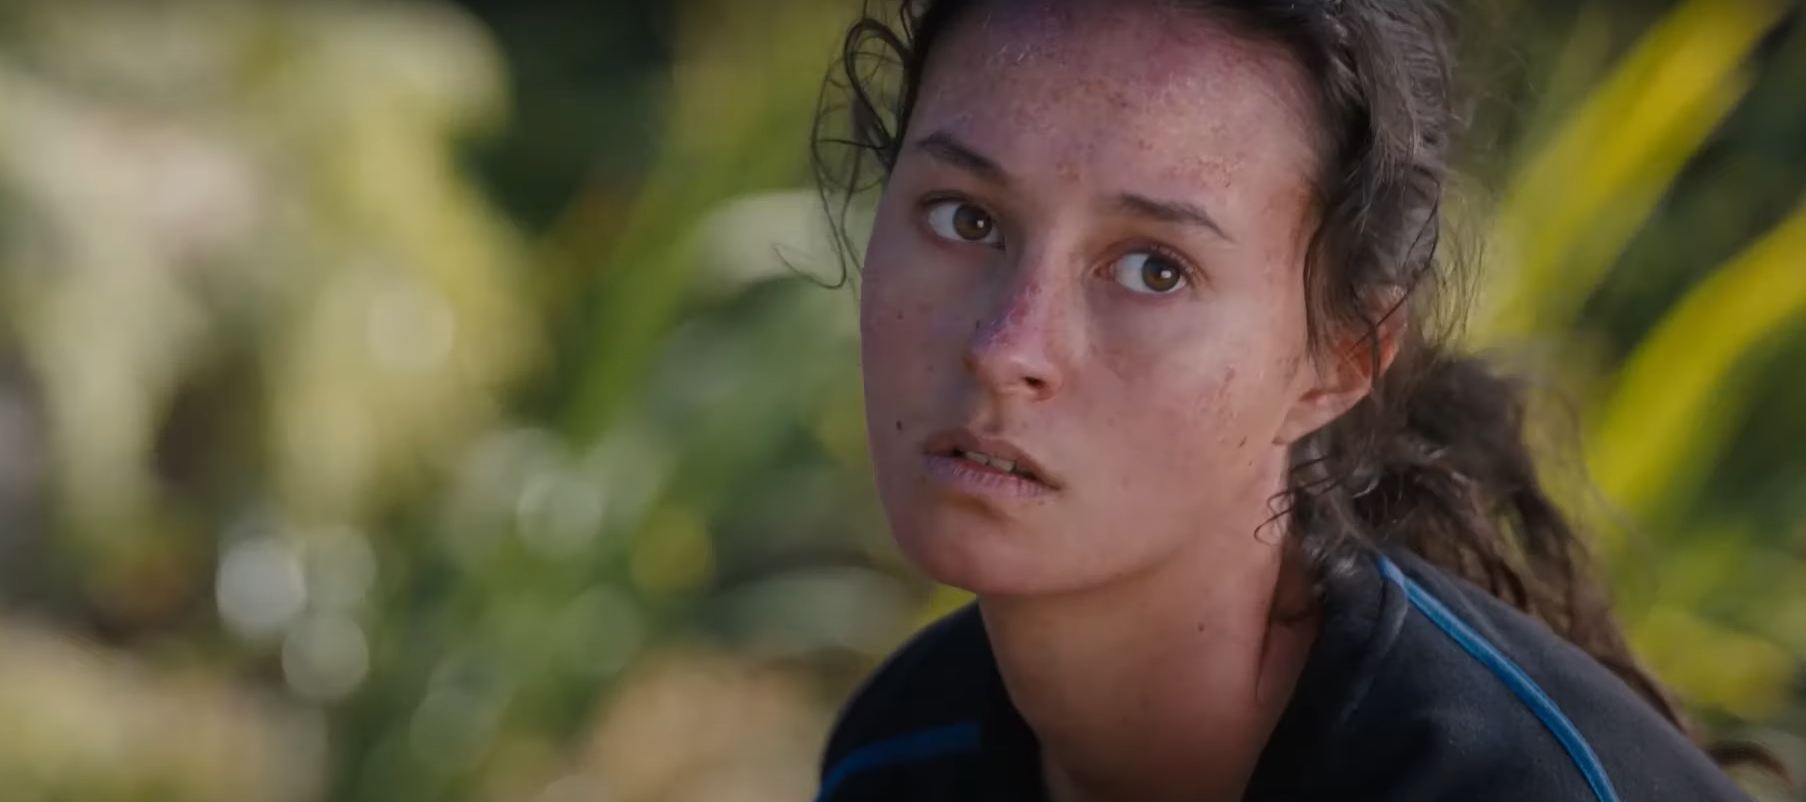 Trailer Watch: “The Wilds” Season 2 Introduces Us to More Castaways